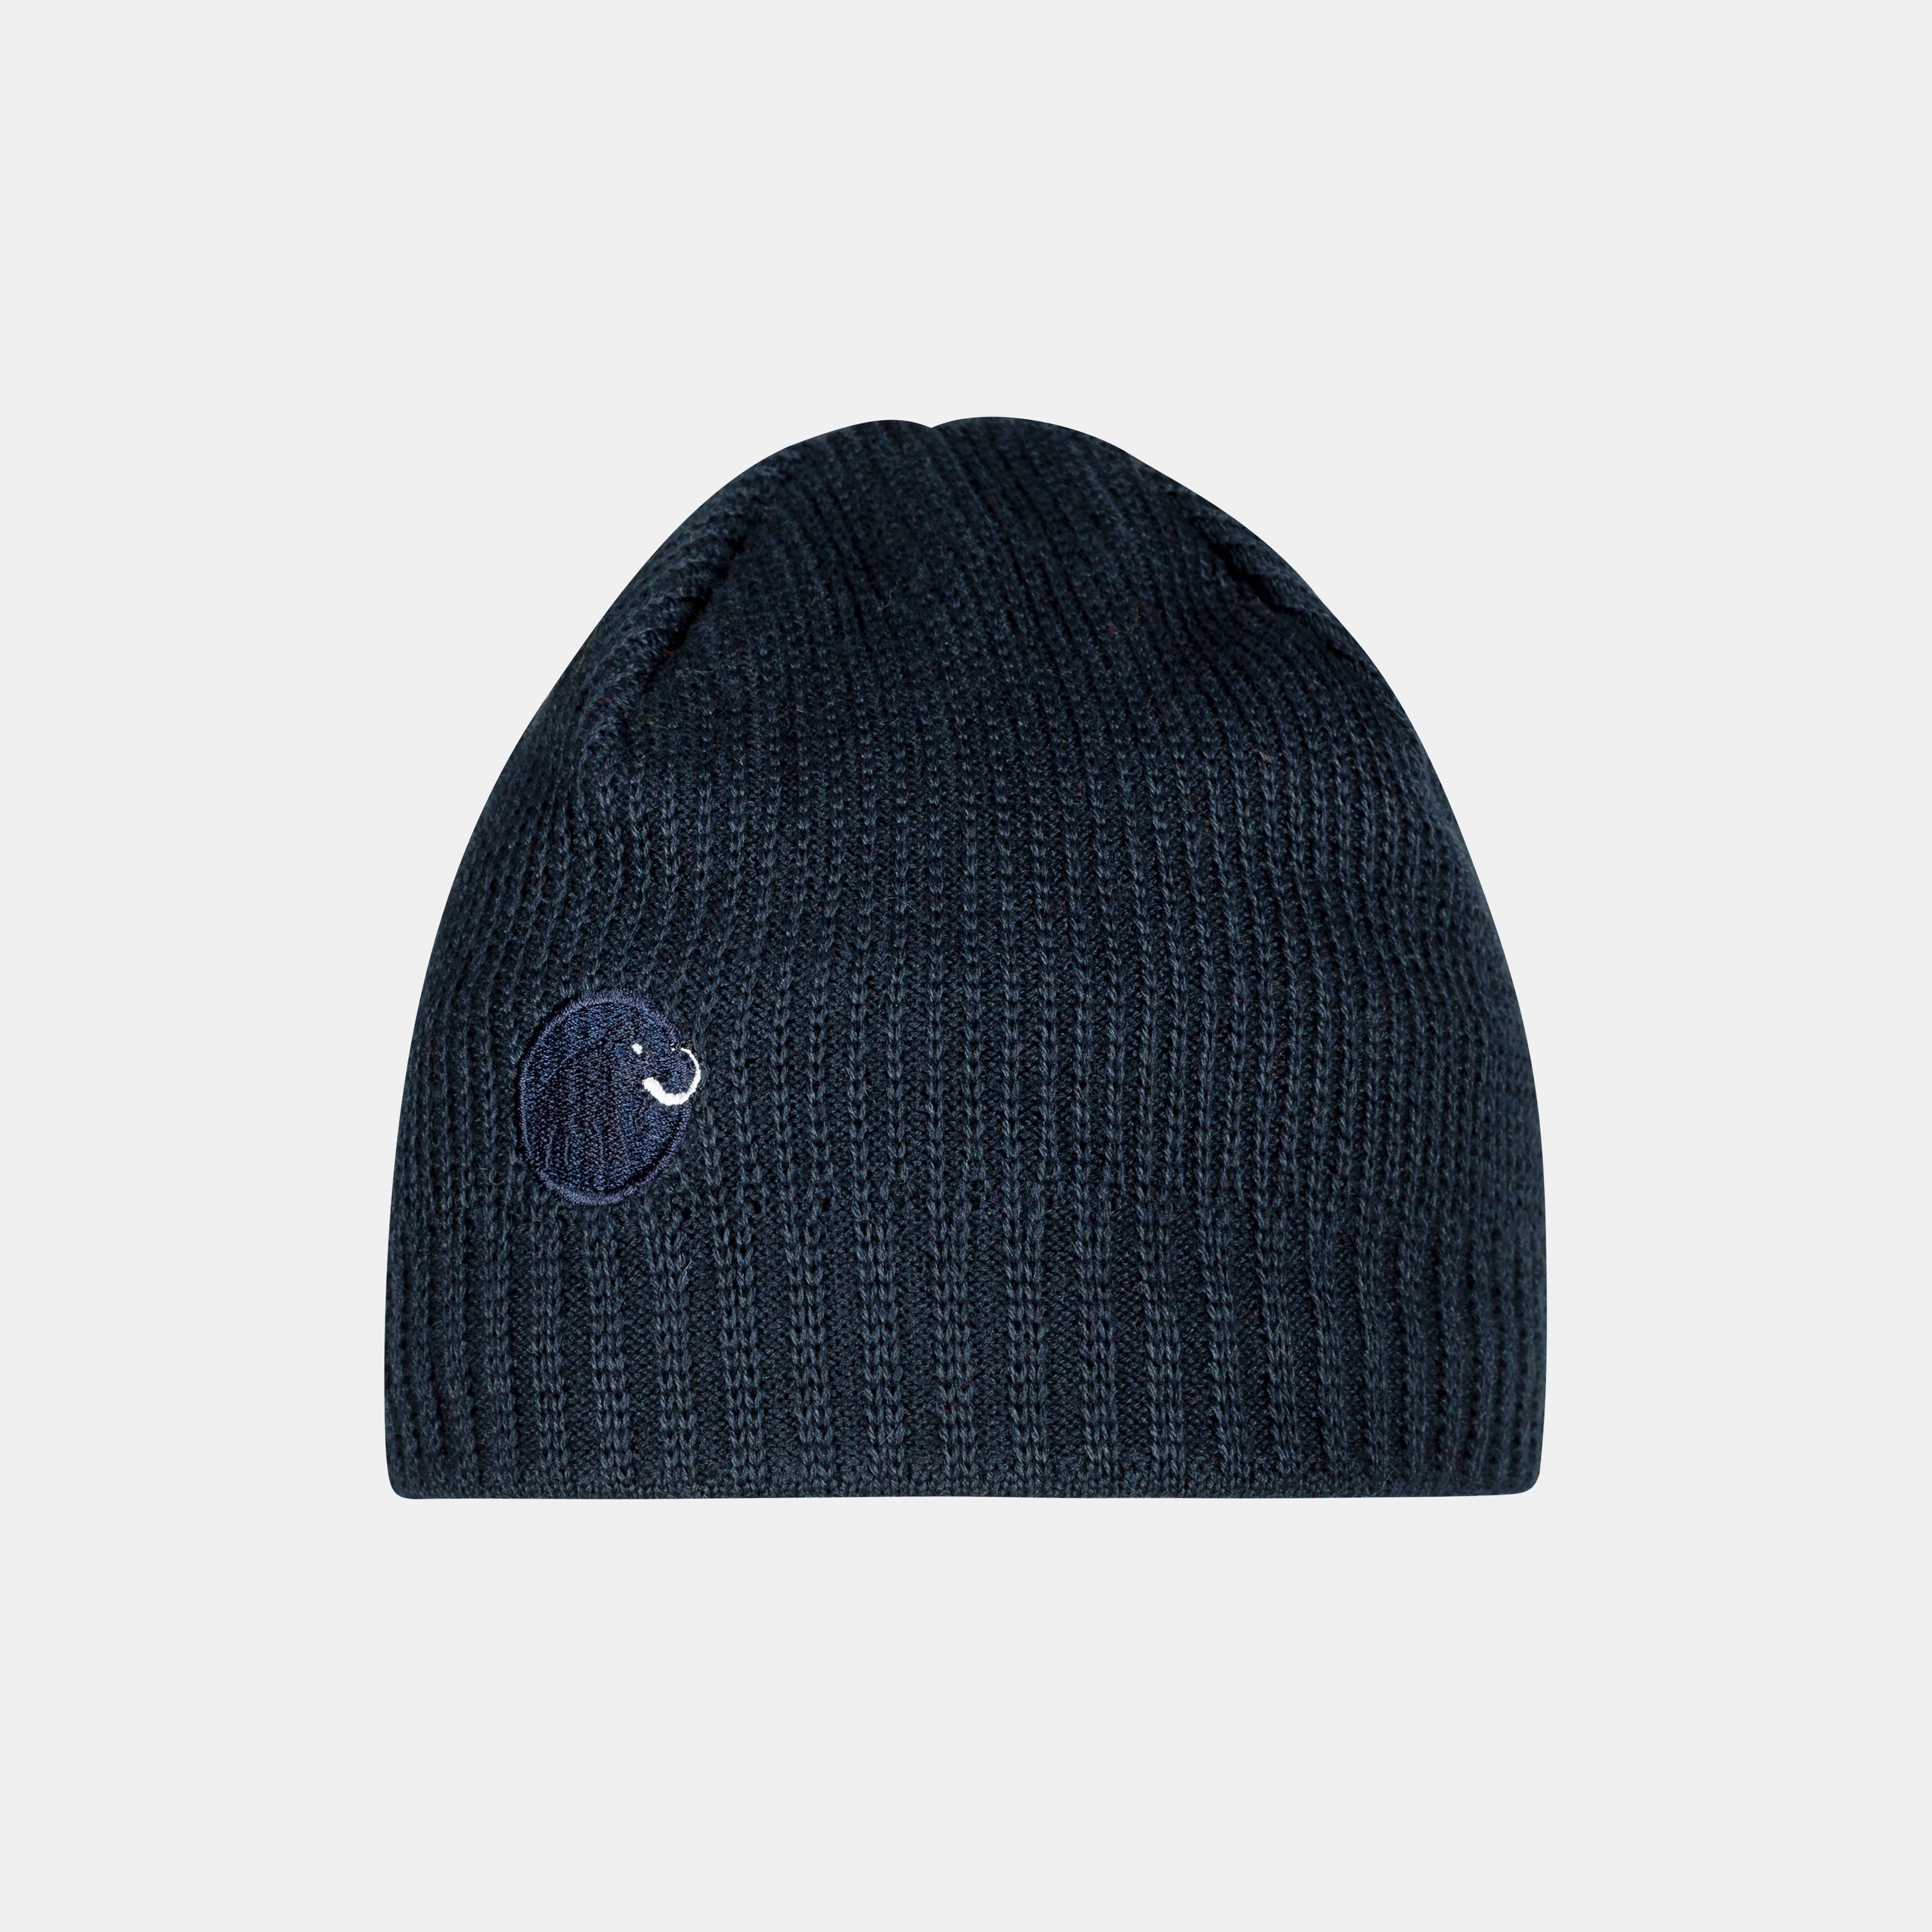 Sublime Beanie product image